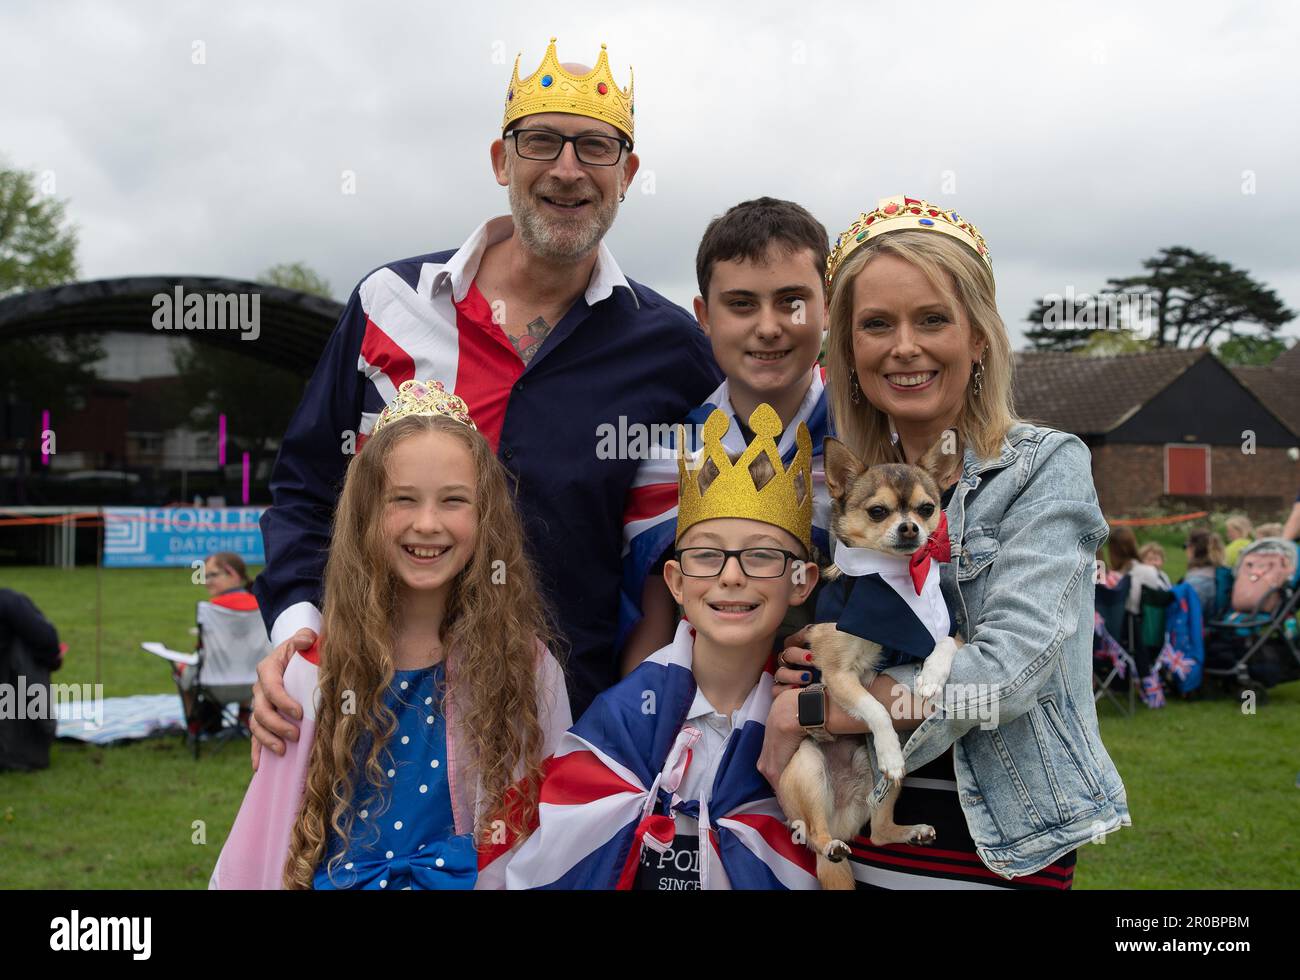 Datchet, Berkshire, UK. 7th May, 2023. The Allmark family and Tuco the dog at the Datchet Coronation Fete in Berkshire, Datchet. Credit: Maureen McLean/Alamy Live News Stock Photo